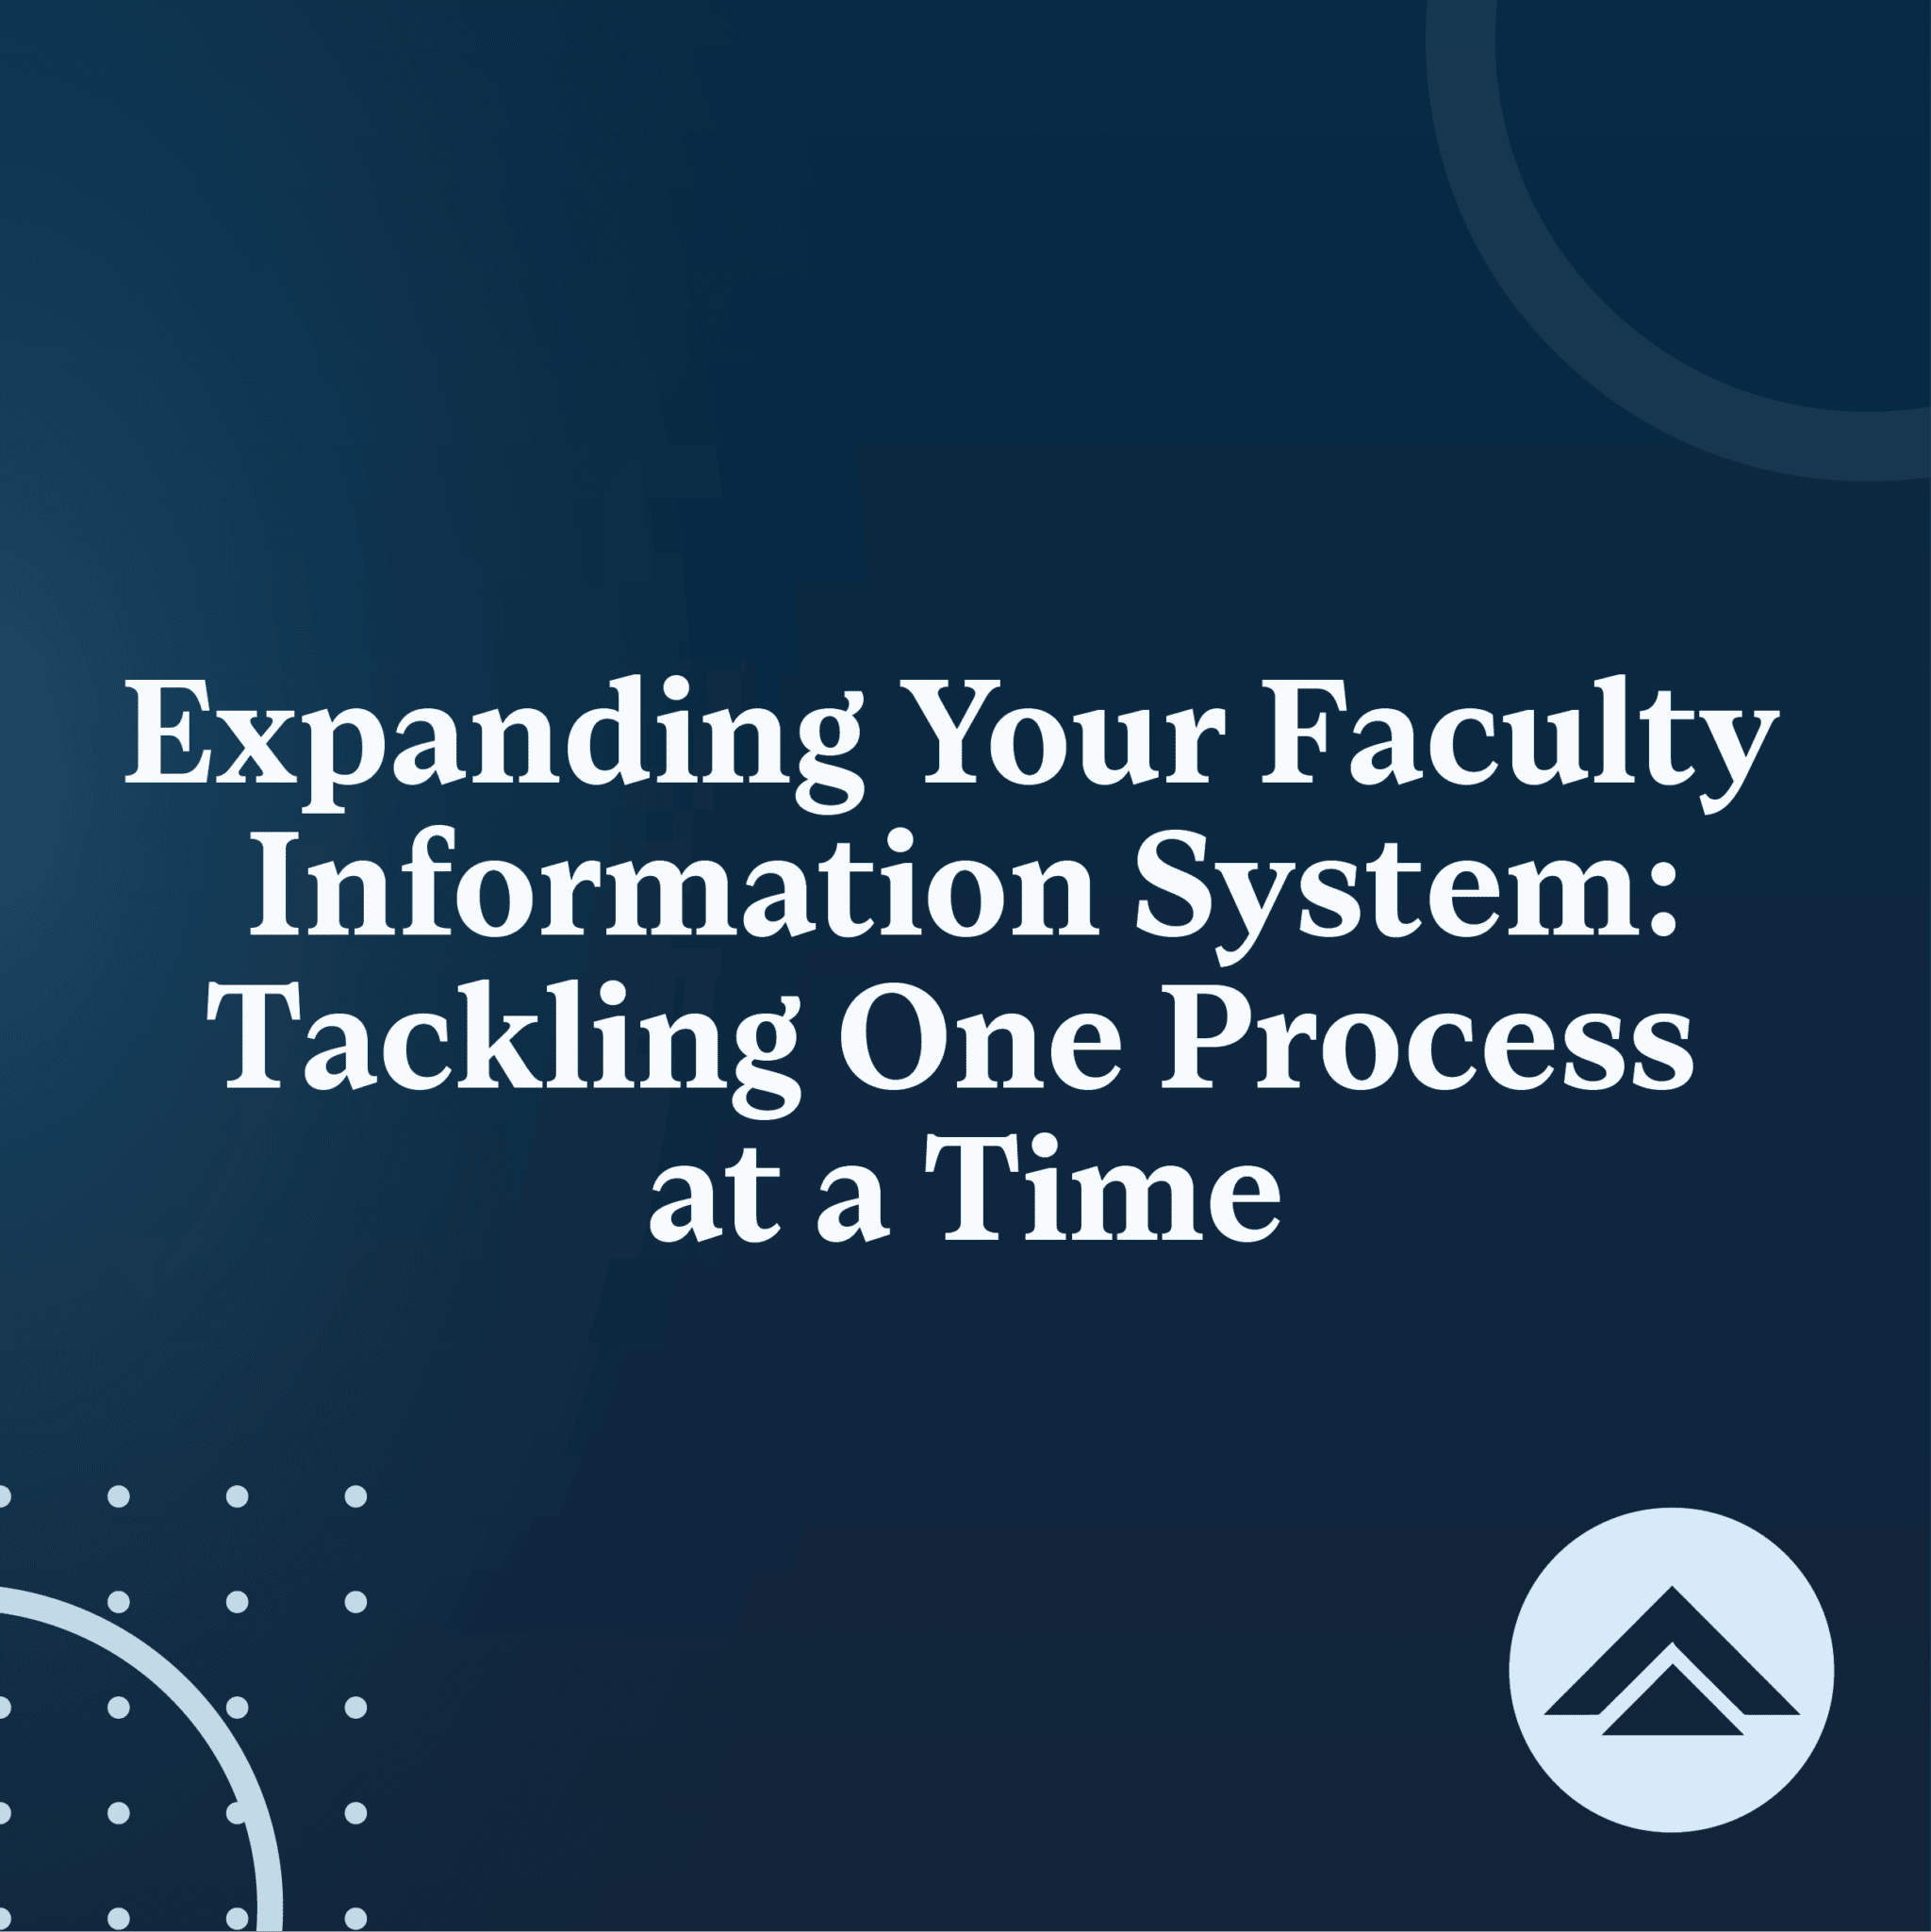 Expanding Your Faculty Information System: Tackling One Process at a Time